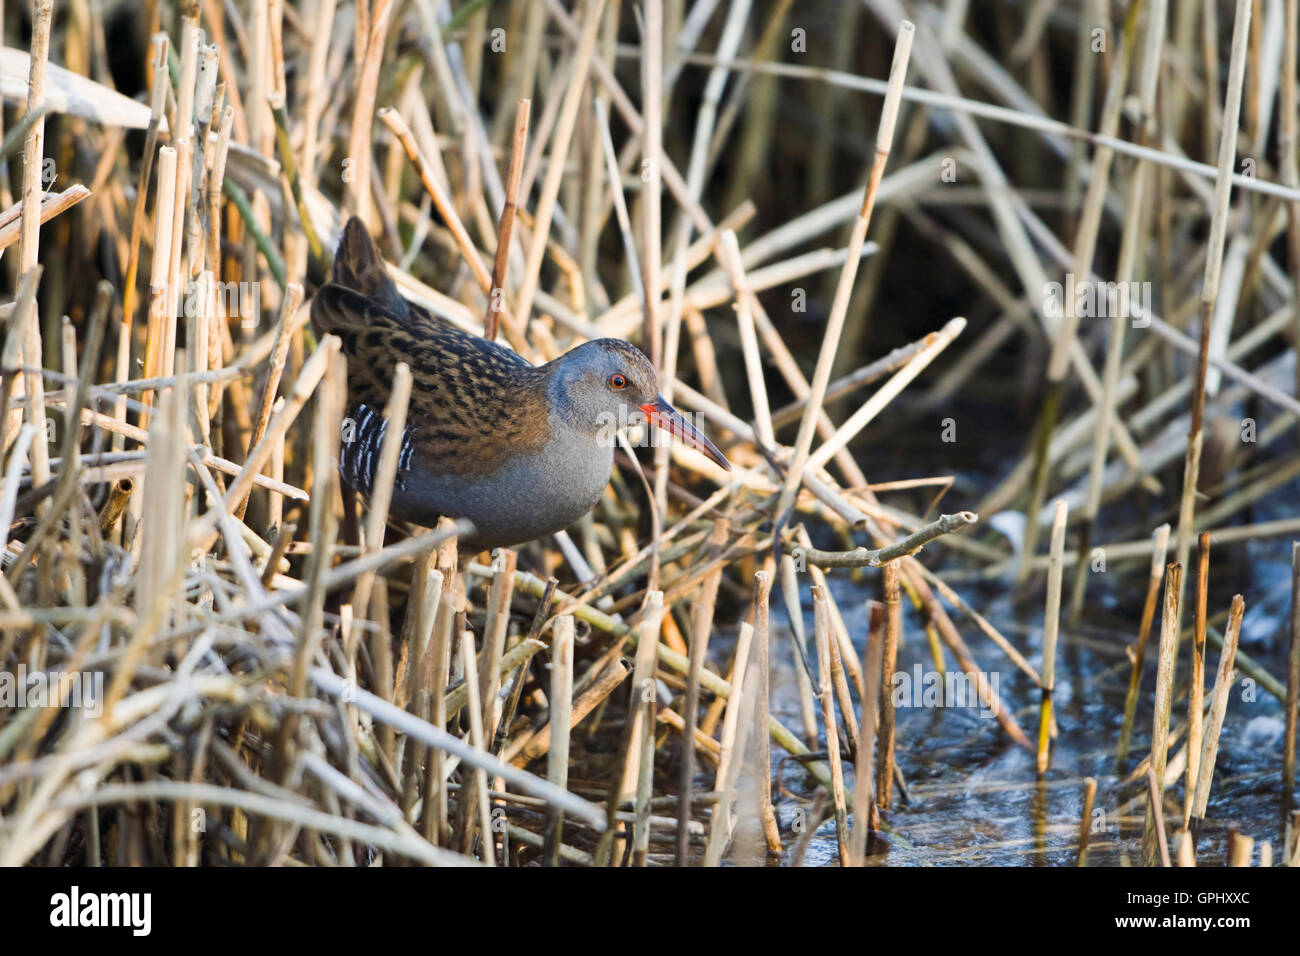 A Water Rail (Rallus aquaticus) amongst reeds in reedbed, Rye Harbour Nature Reserve, East Sussex, UK Stock Photo